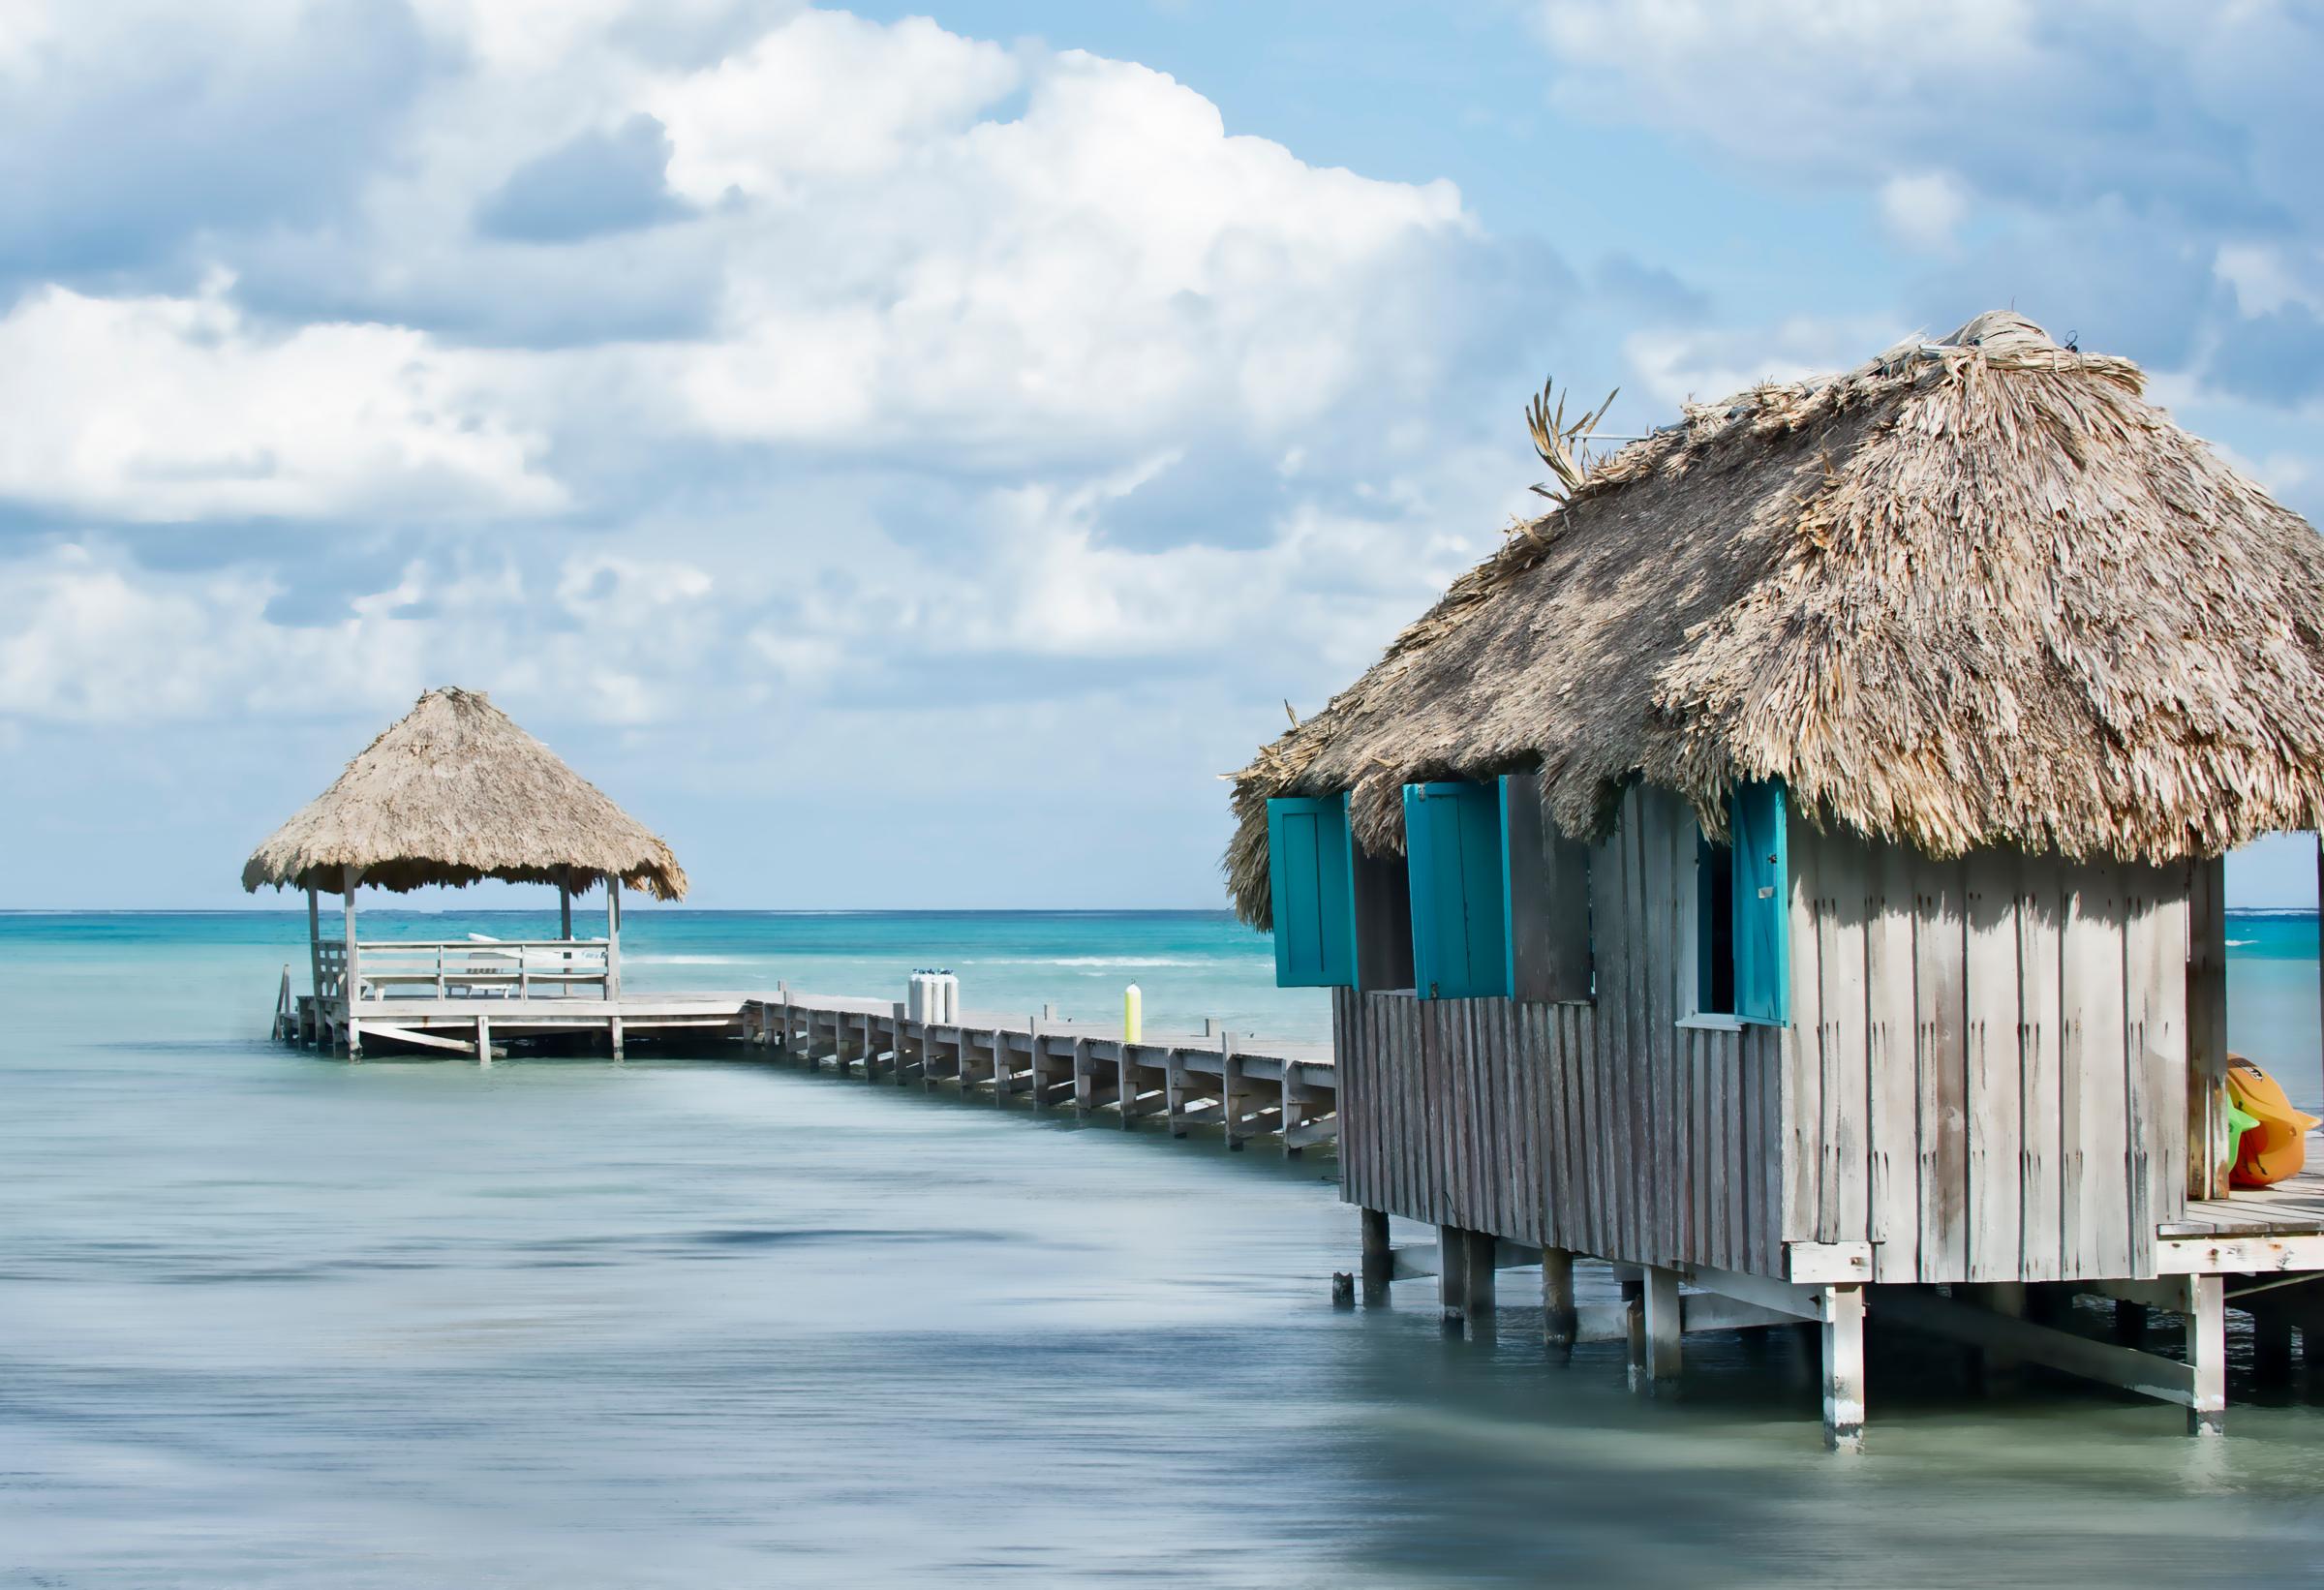 Pier/Wharf in Ambergris Caye Belize